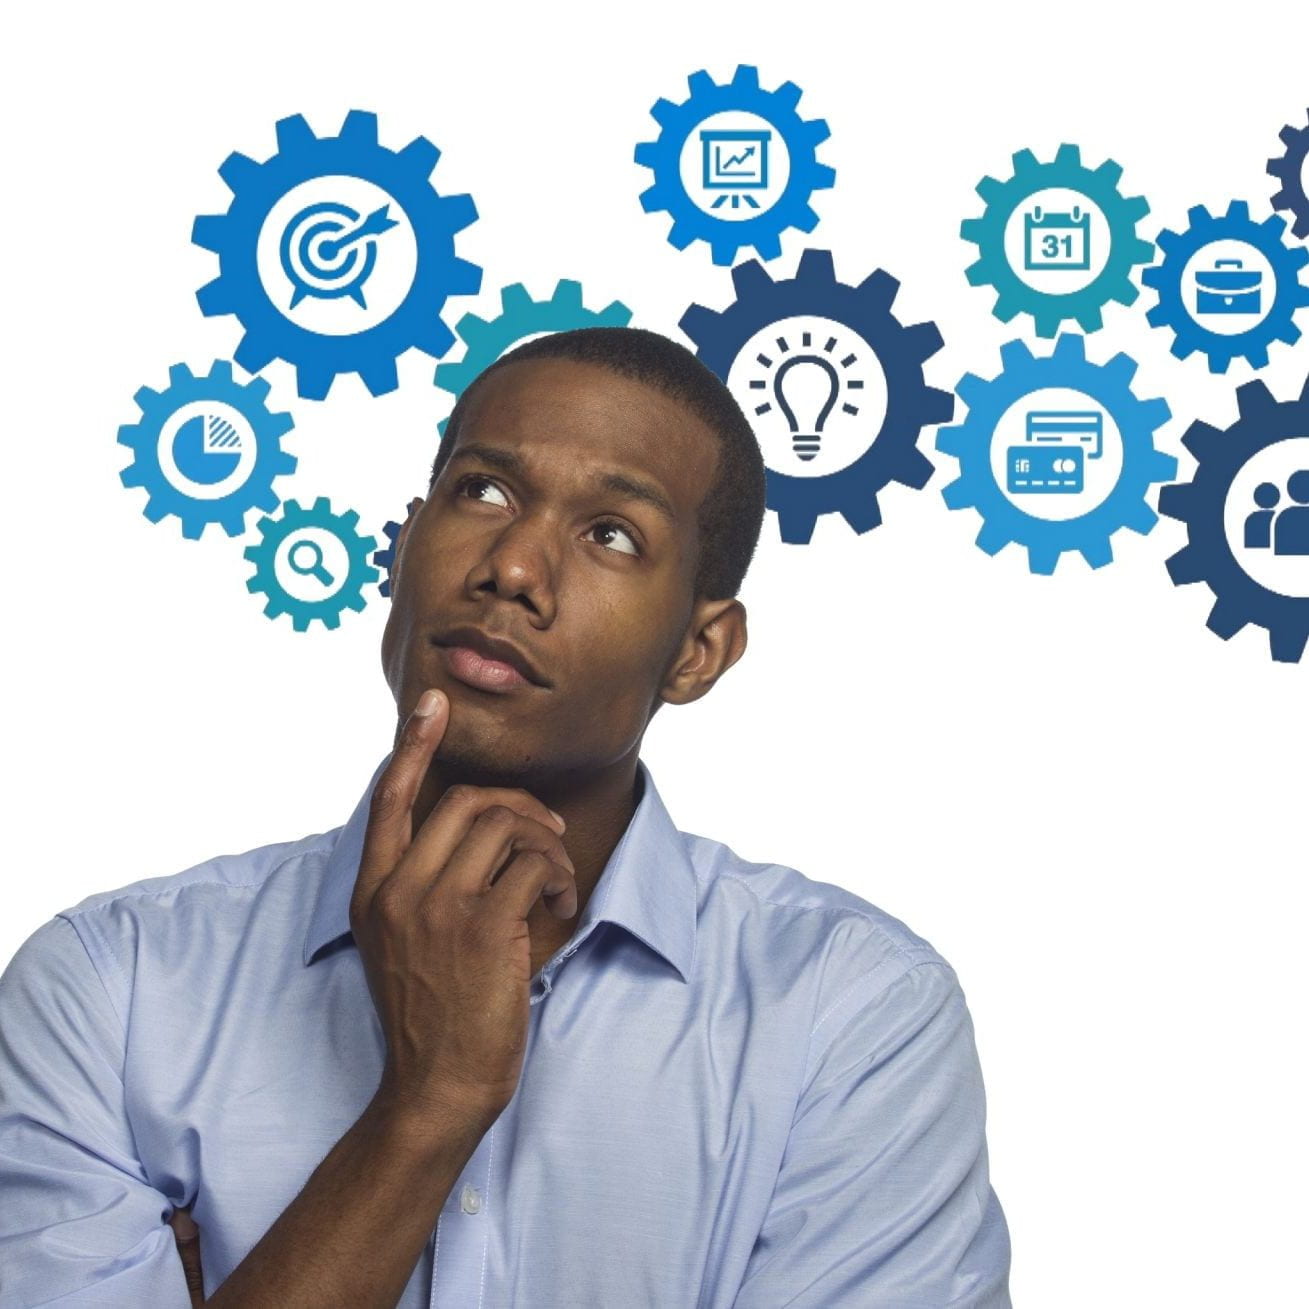 Young man in concentrated thought, considering many choices which are illustrated via graphic widgets surrounding his head.